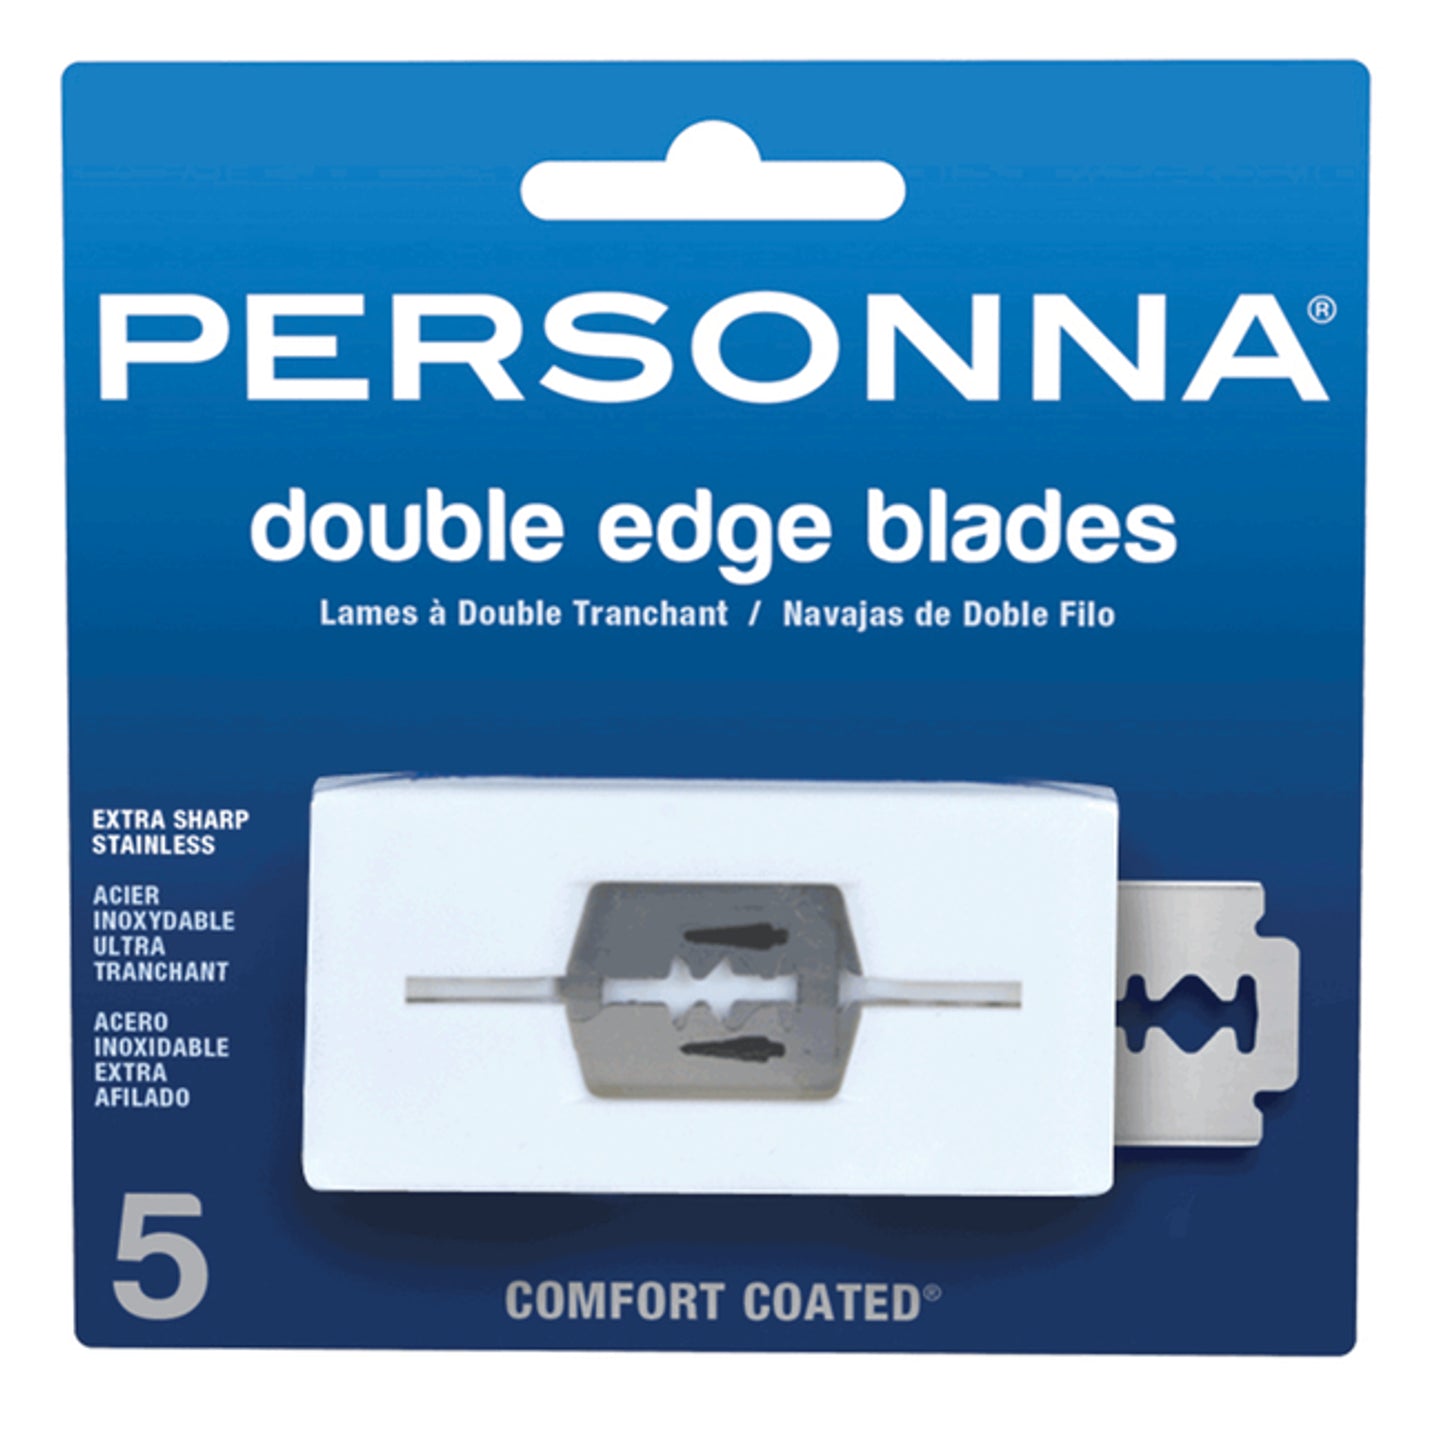 Personna Double Edge Comfort Coated Blades - 5 Blades